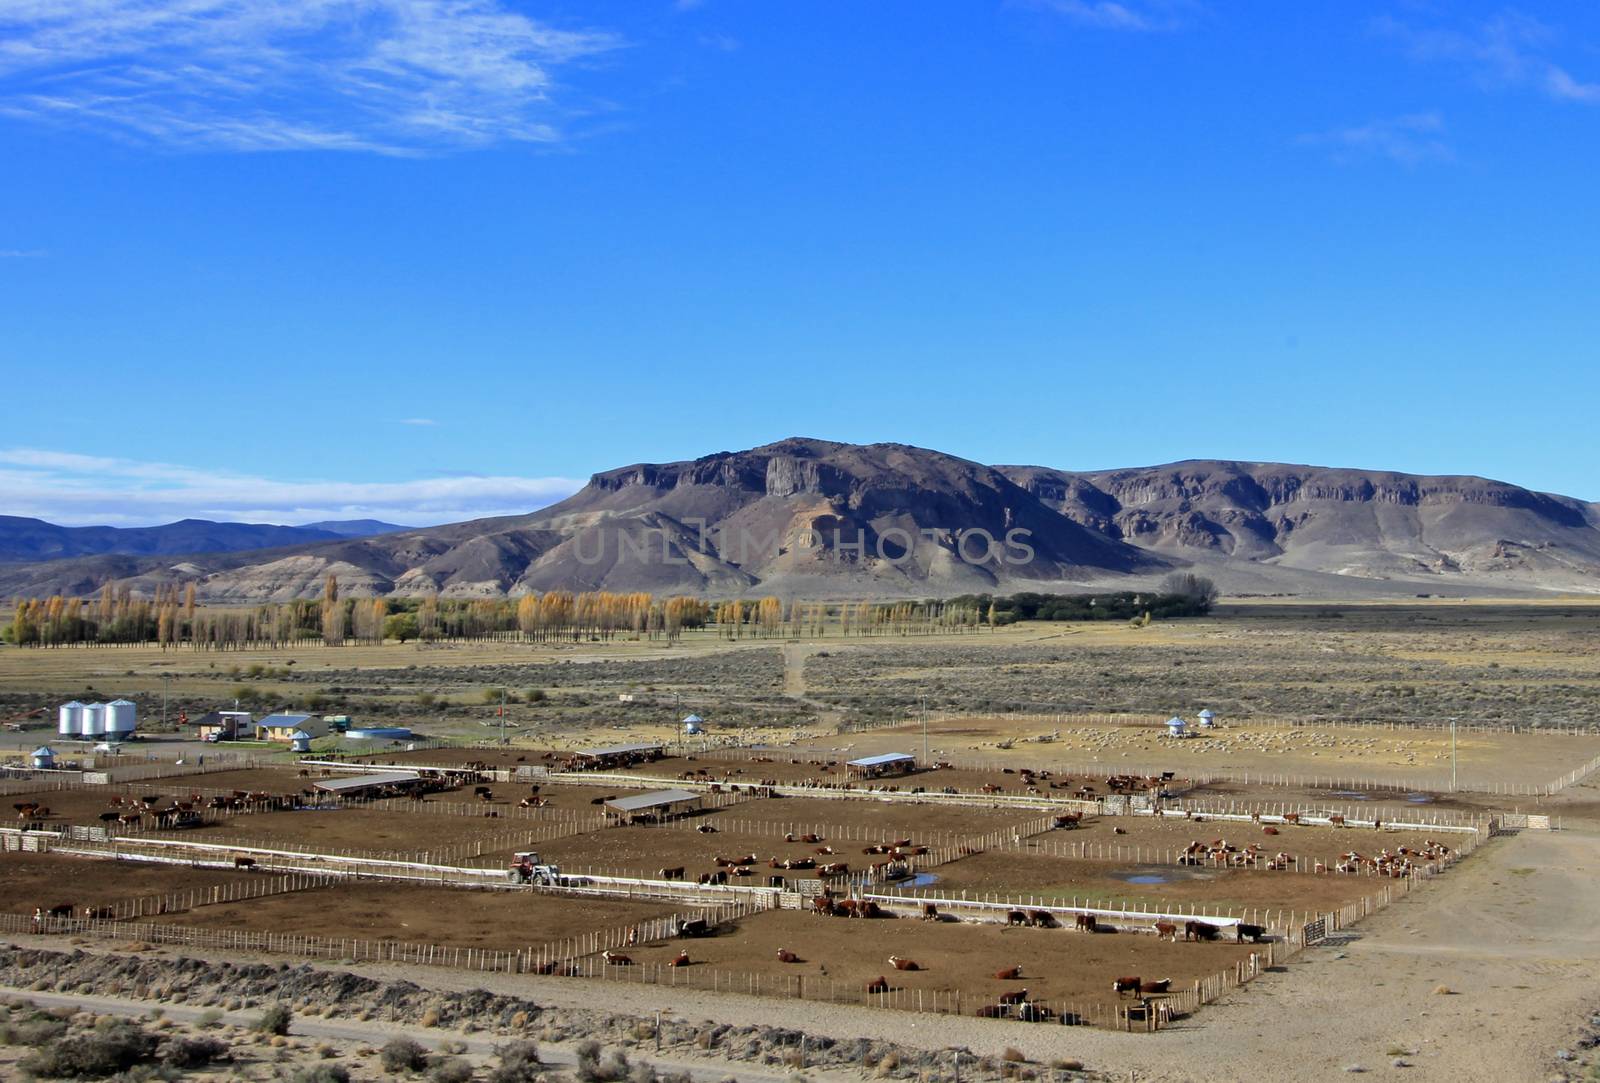 Huge cow farm, Chubut valley, Patagonia Argentina